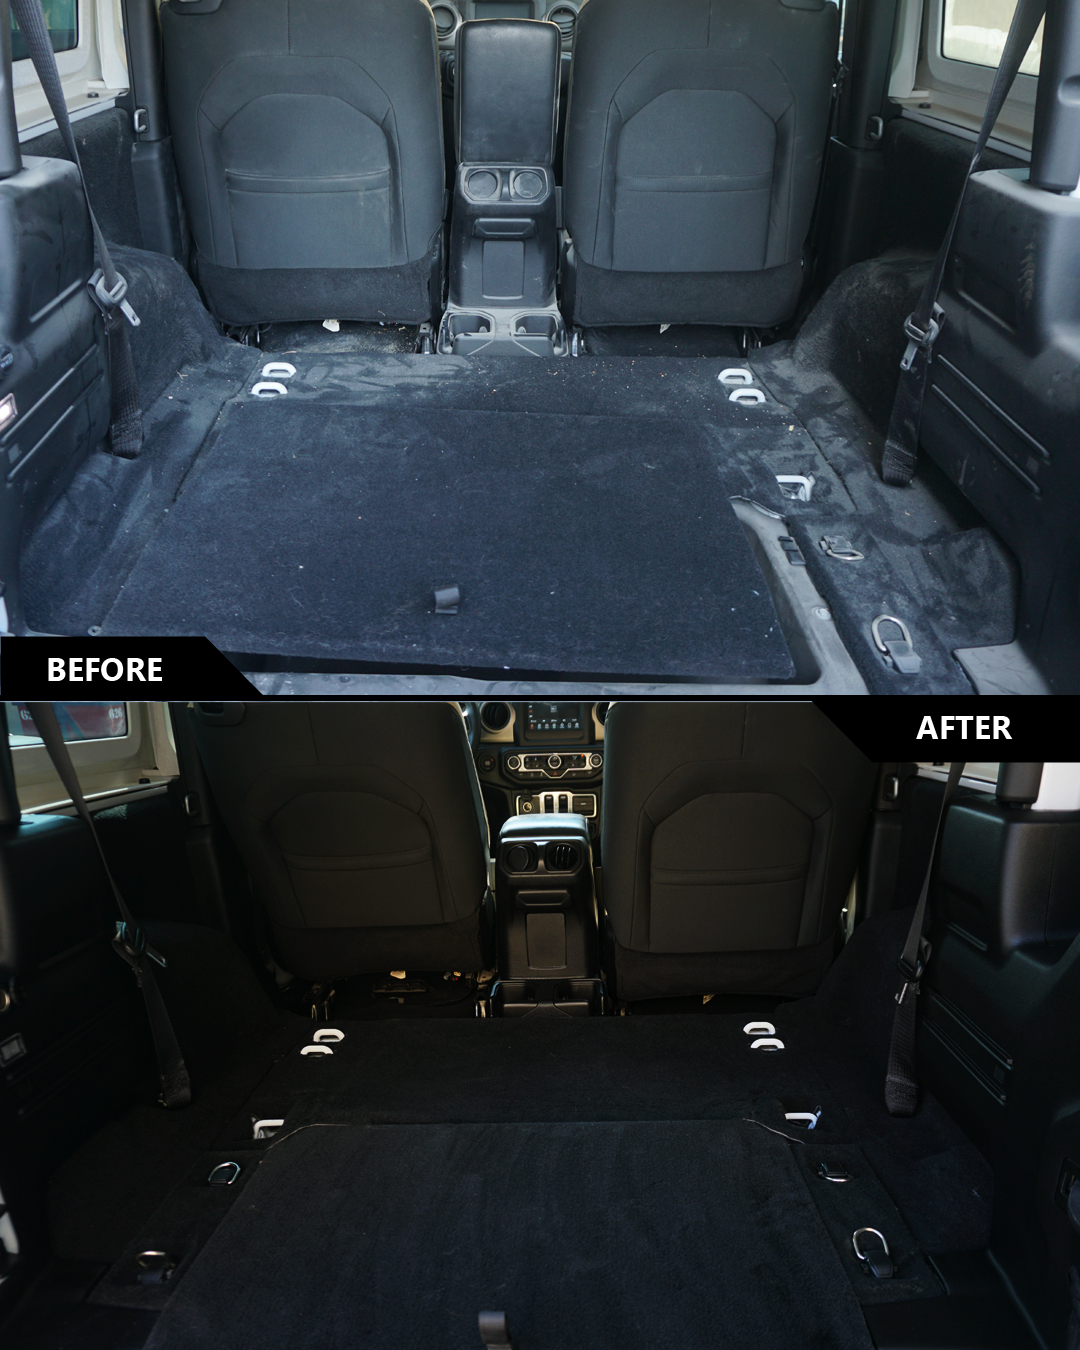 Professional Car Interior Detailing Services: Step by Step Guide